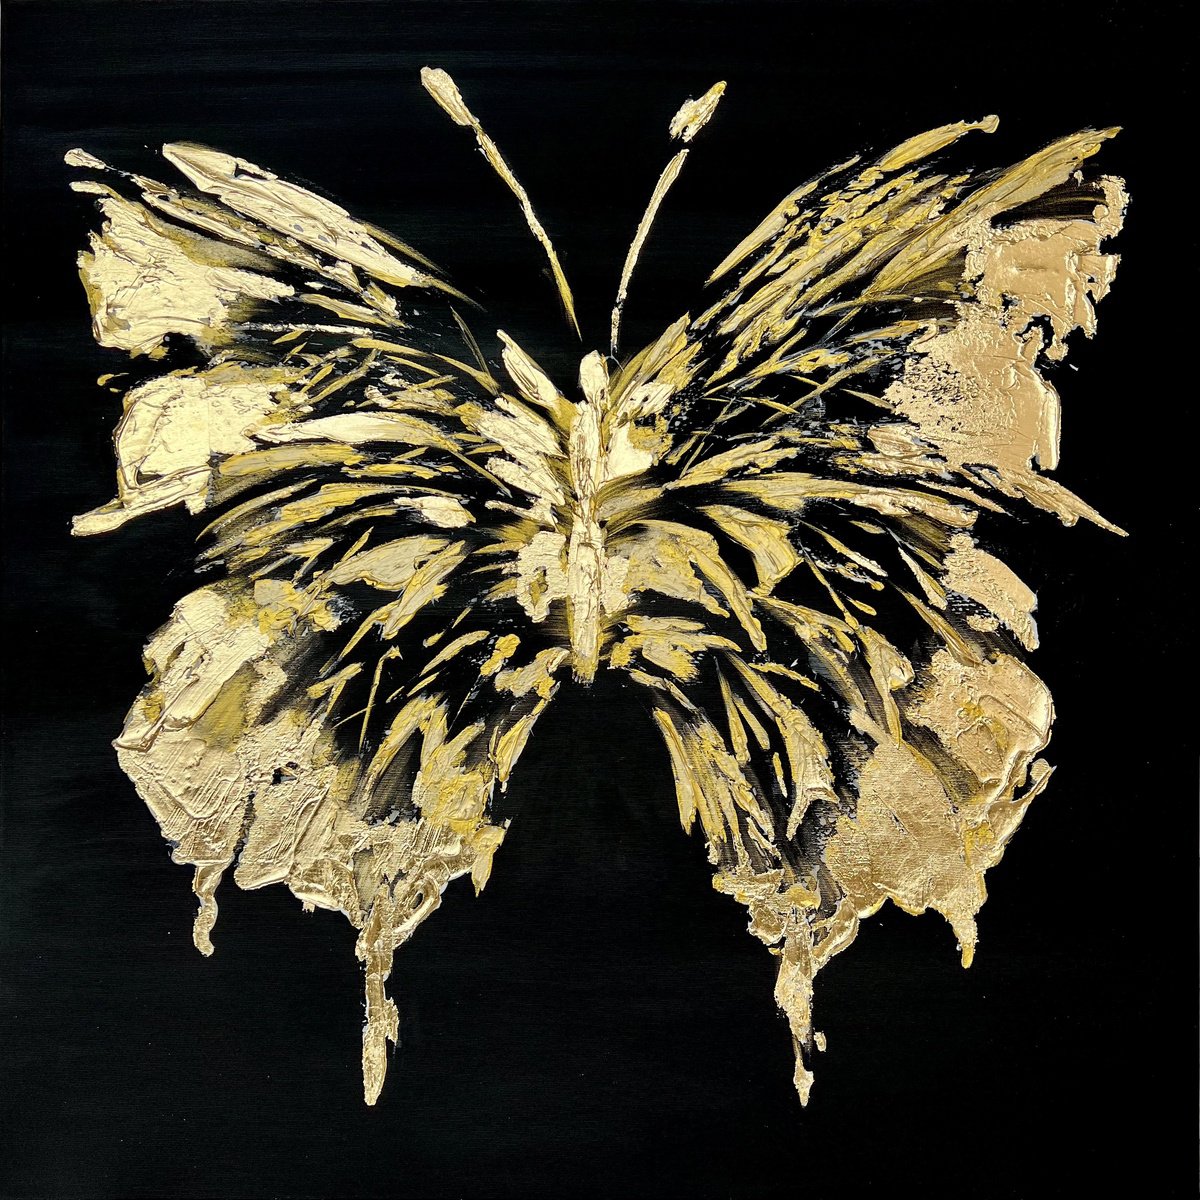 Gold and Black abstract butterfly. Black gold abstraction. by Marina Skromova